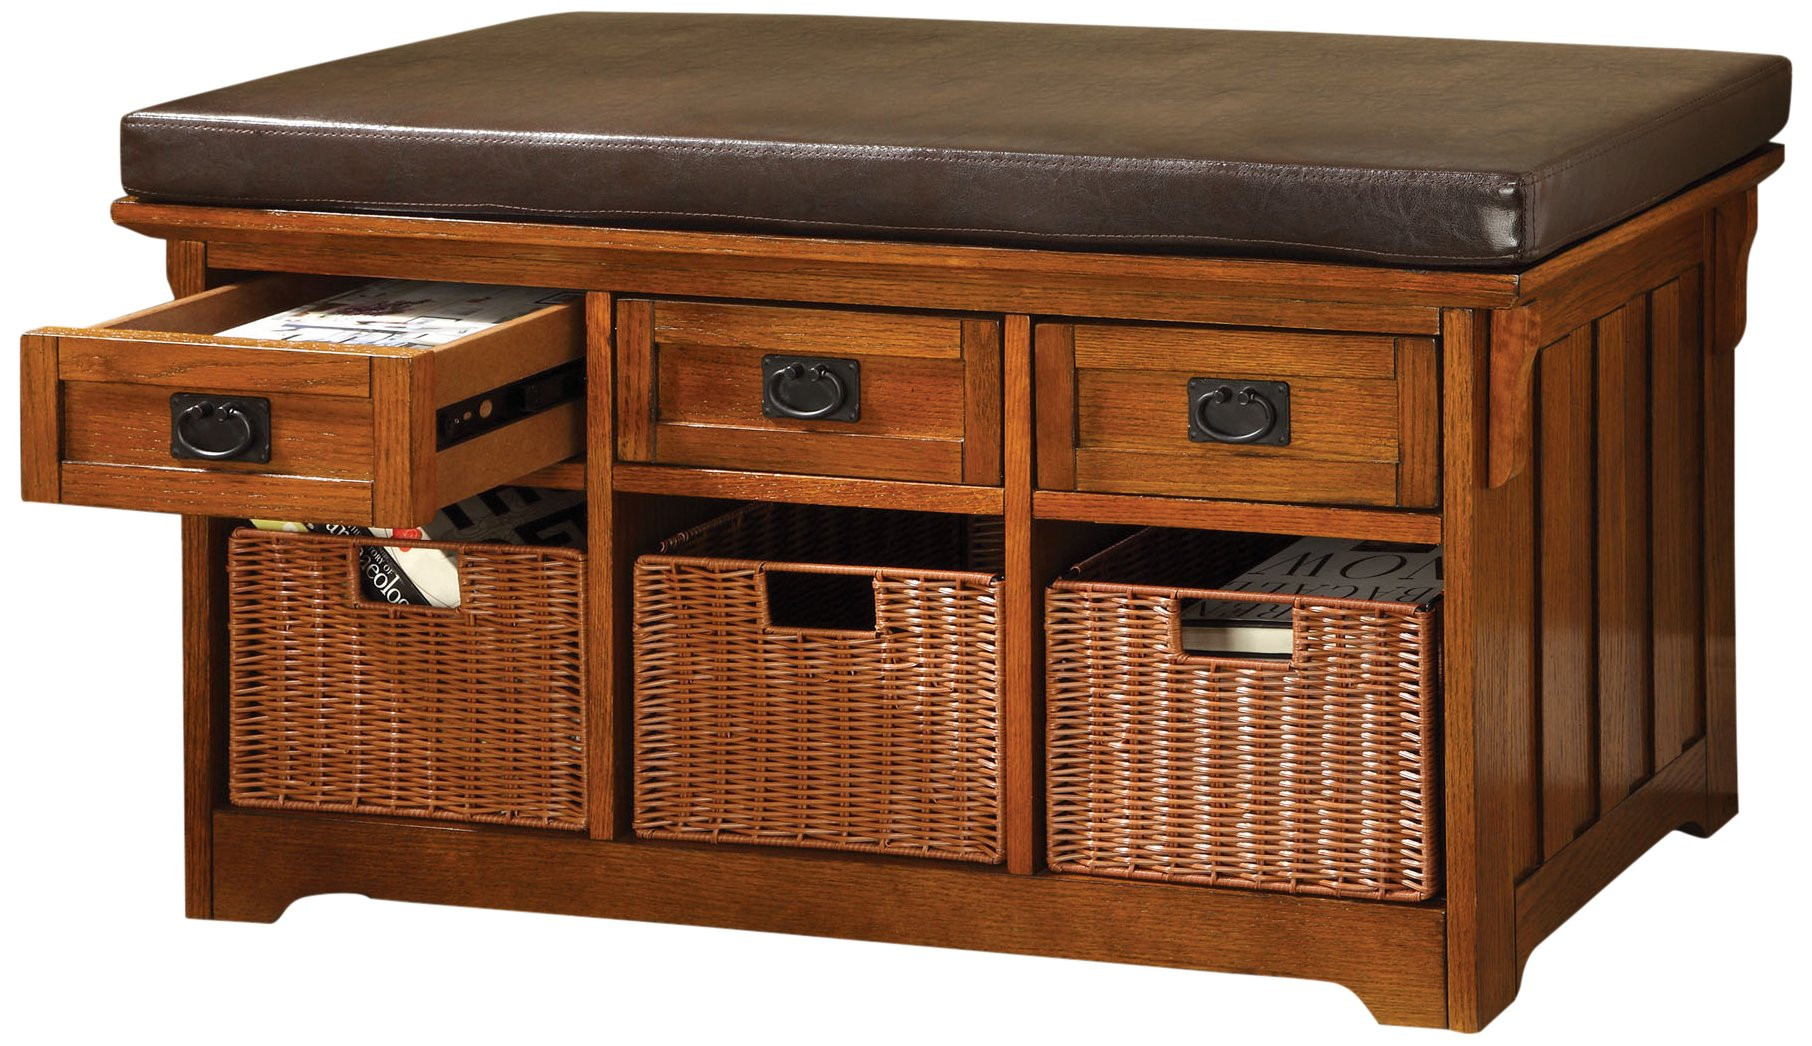 Storage Bench With Baskets
 Entryway Bench with Baskets Amazon